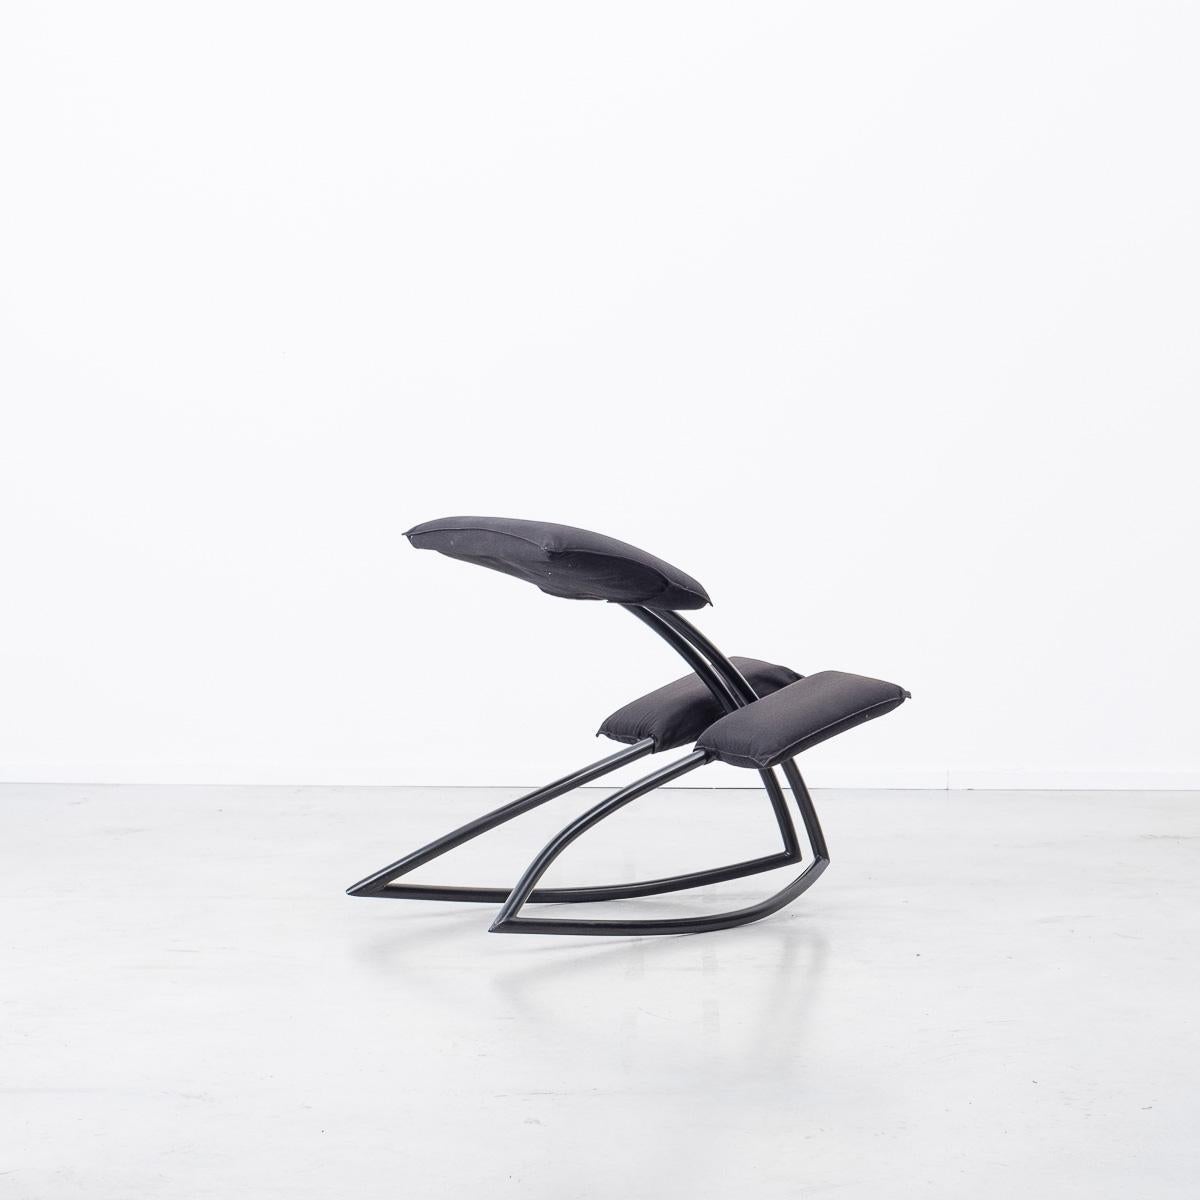 Mister Bliss is an unusual chair designed by the prolific French designer Philippe Starck. This is an interesting example of Starck’s design work in the 1980s and demonstrates his quirky post-modern sensibilities. Created from bent tubular metal